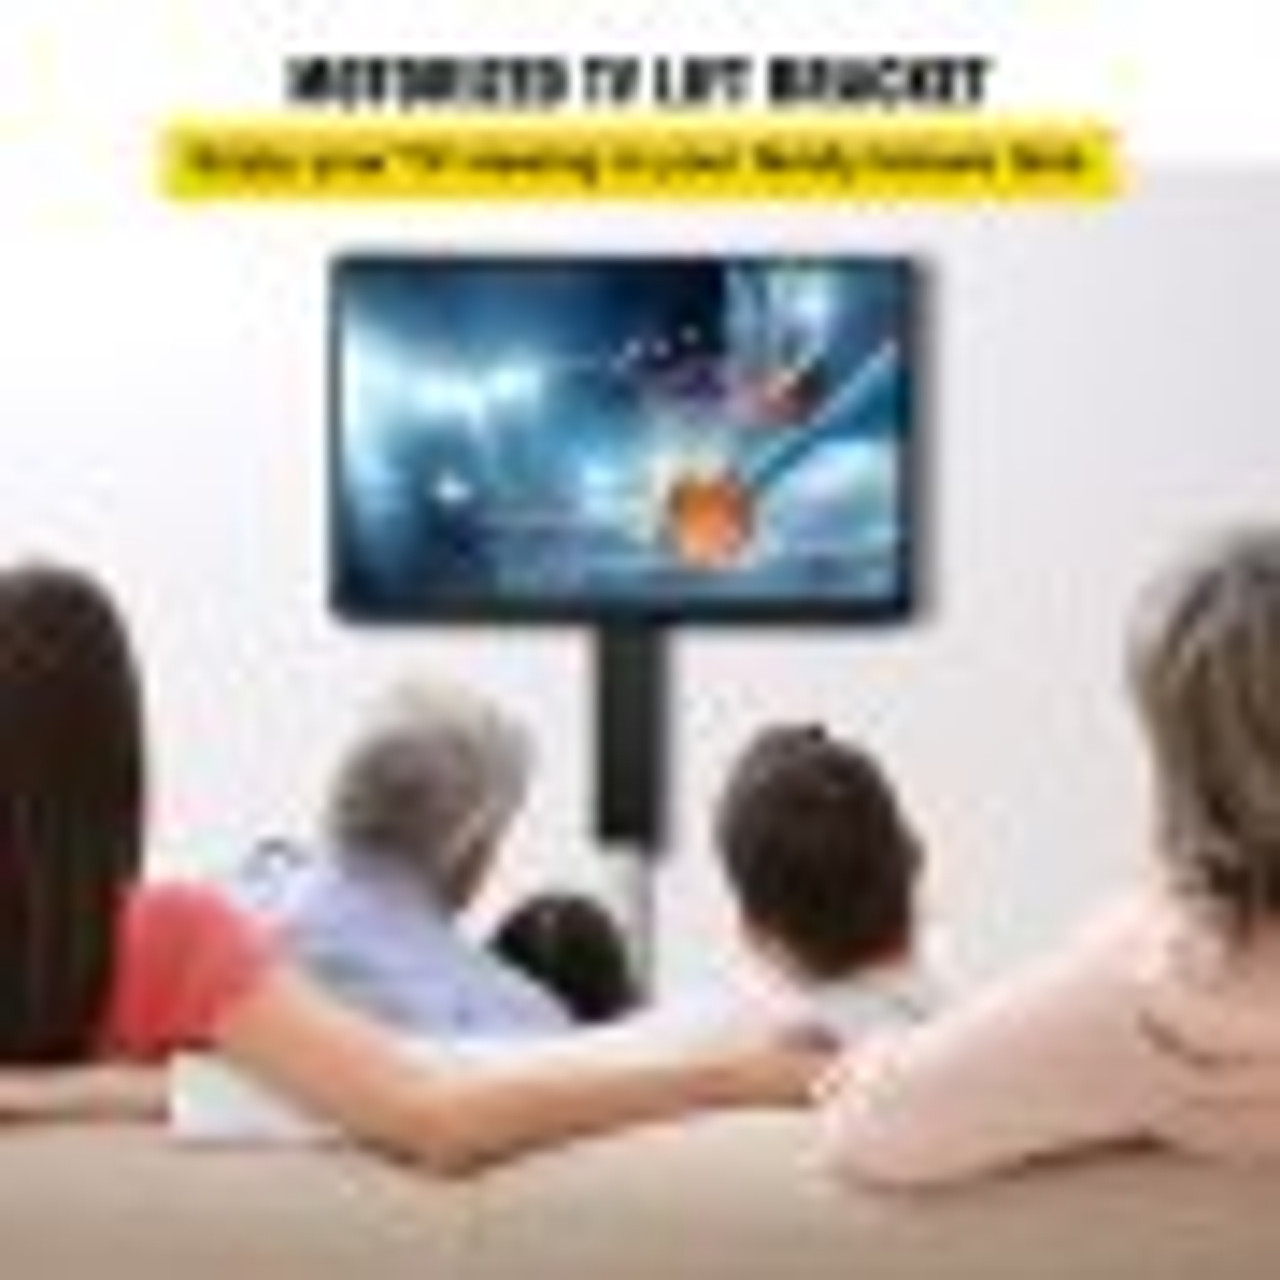 Motorized TV Lift Stroke Length 28 Inches Motorized TV Mount Fit for Max.50 Inch TV Lift with Remote Control Height Adjustable 38-65 Inch,Load Capacity 132 Lbs